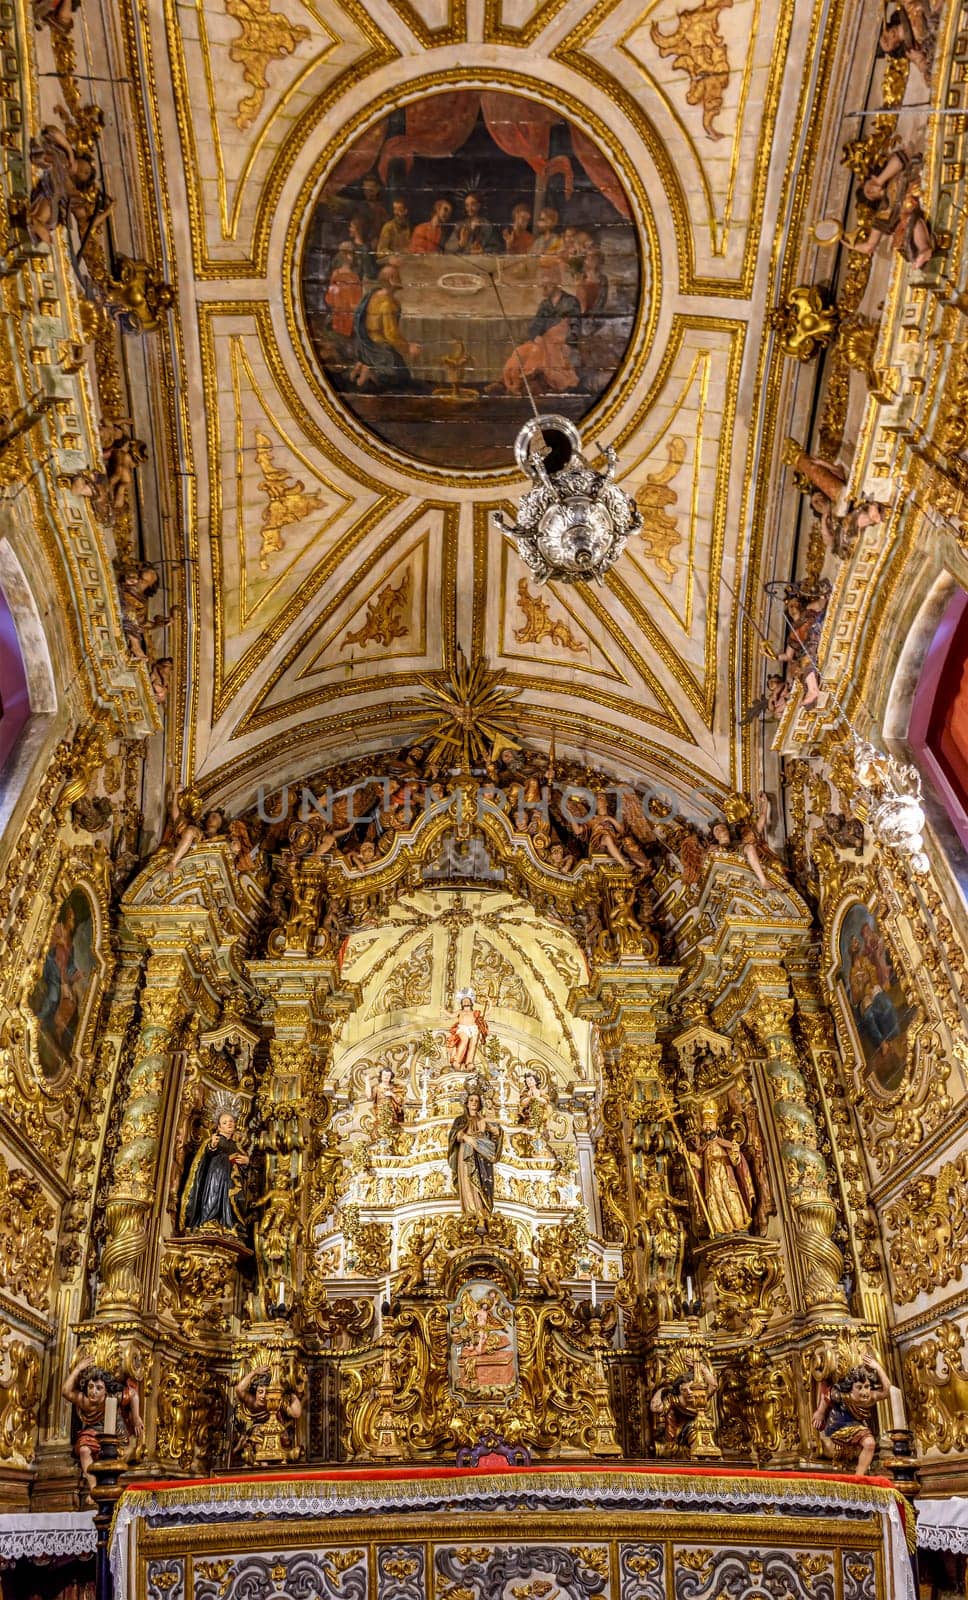 Interior of Nossa Senhora do Pilar basilica in Ouro Preto and considered the second richest church in Brazil, all decorated with gold in baroque style